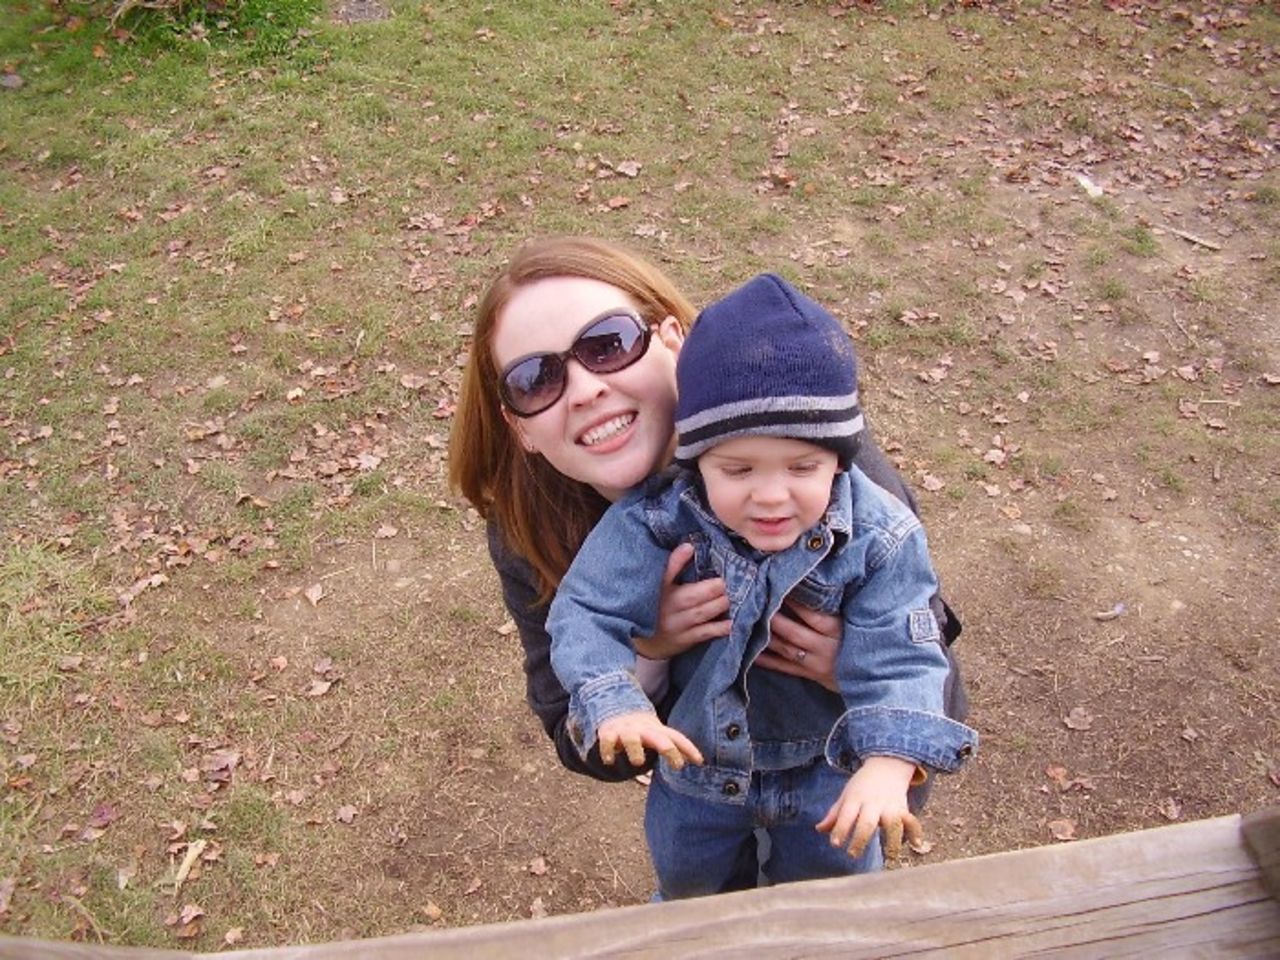 Crookston and Samuel smile for the camera on their annual trip to the pumpkin patch in September 2006. "With only one child to pay for, we definitely are able to do more of these types of excursions than if there were multiple children," Crookston said. 